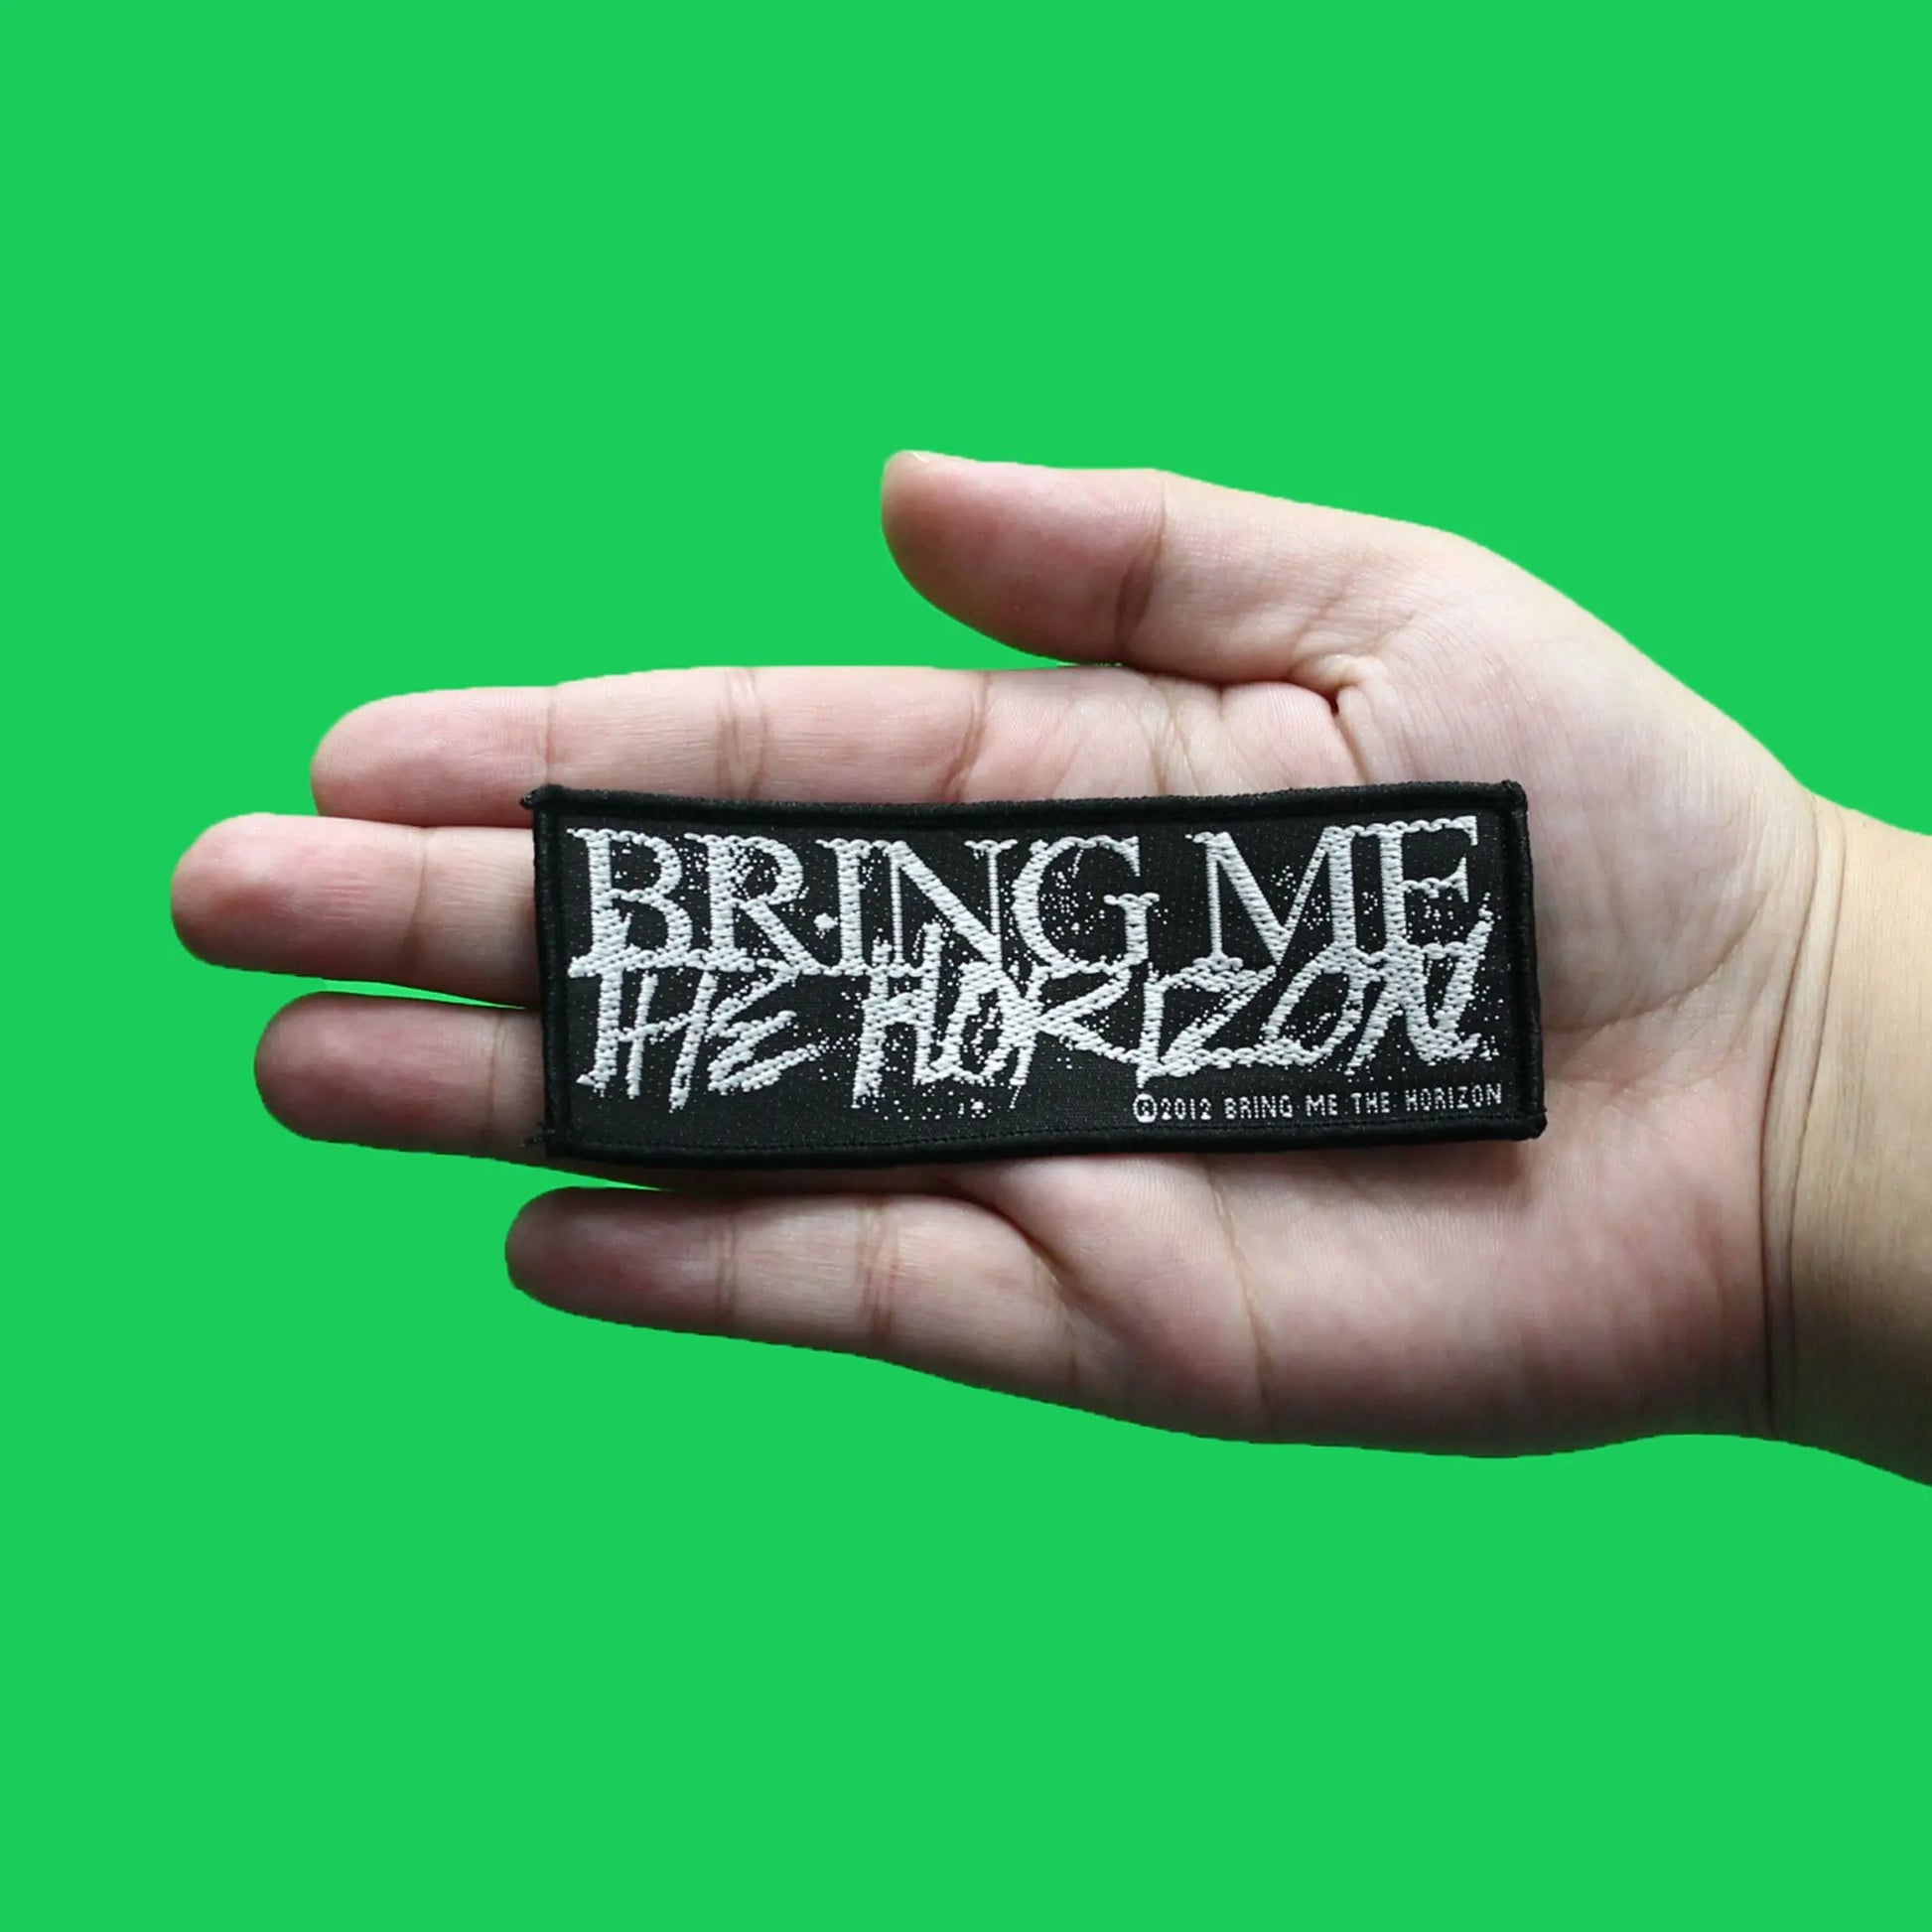 Bring Me The Horizon Horror Logo Patch Heavy Metal Band Woven Iron On